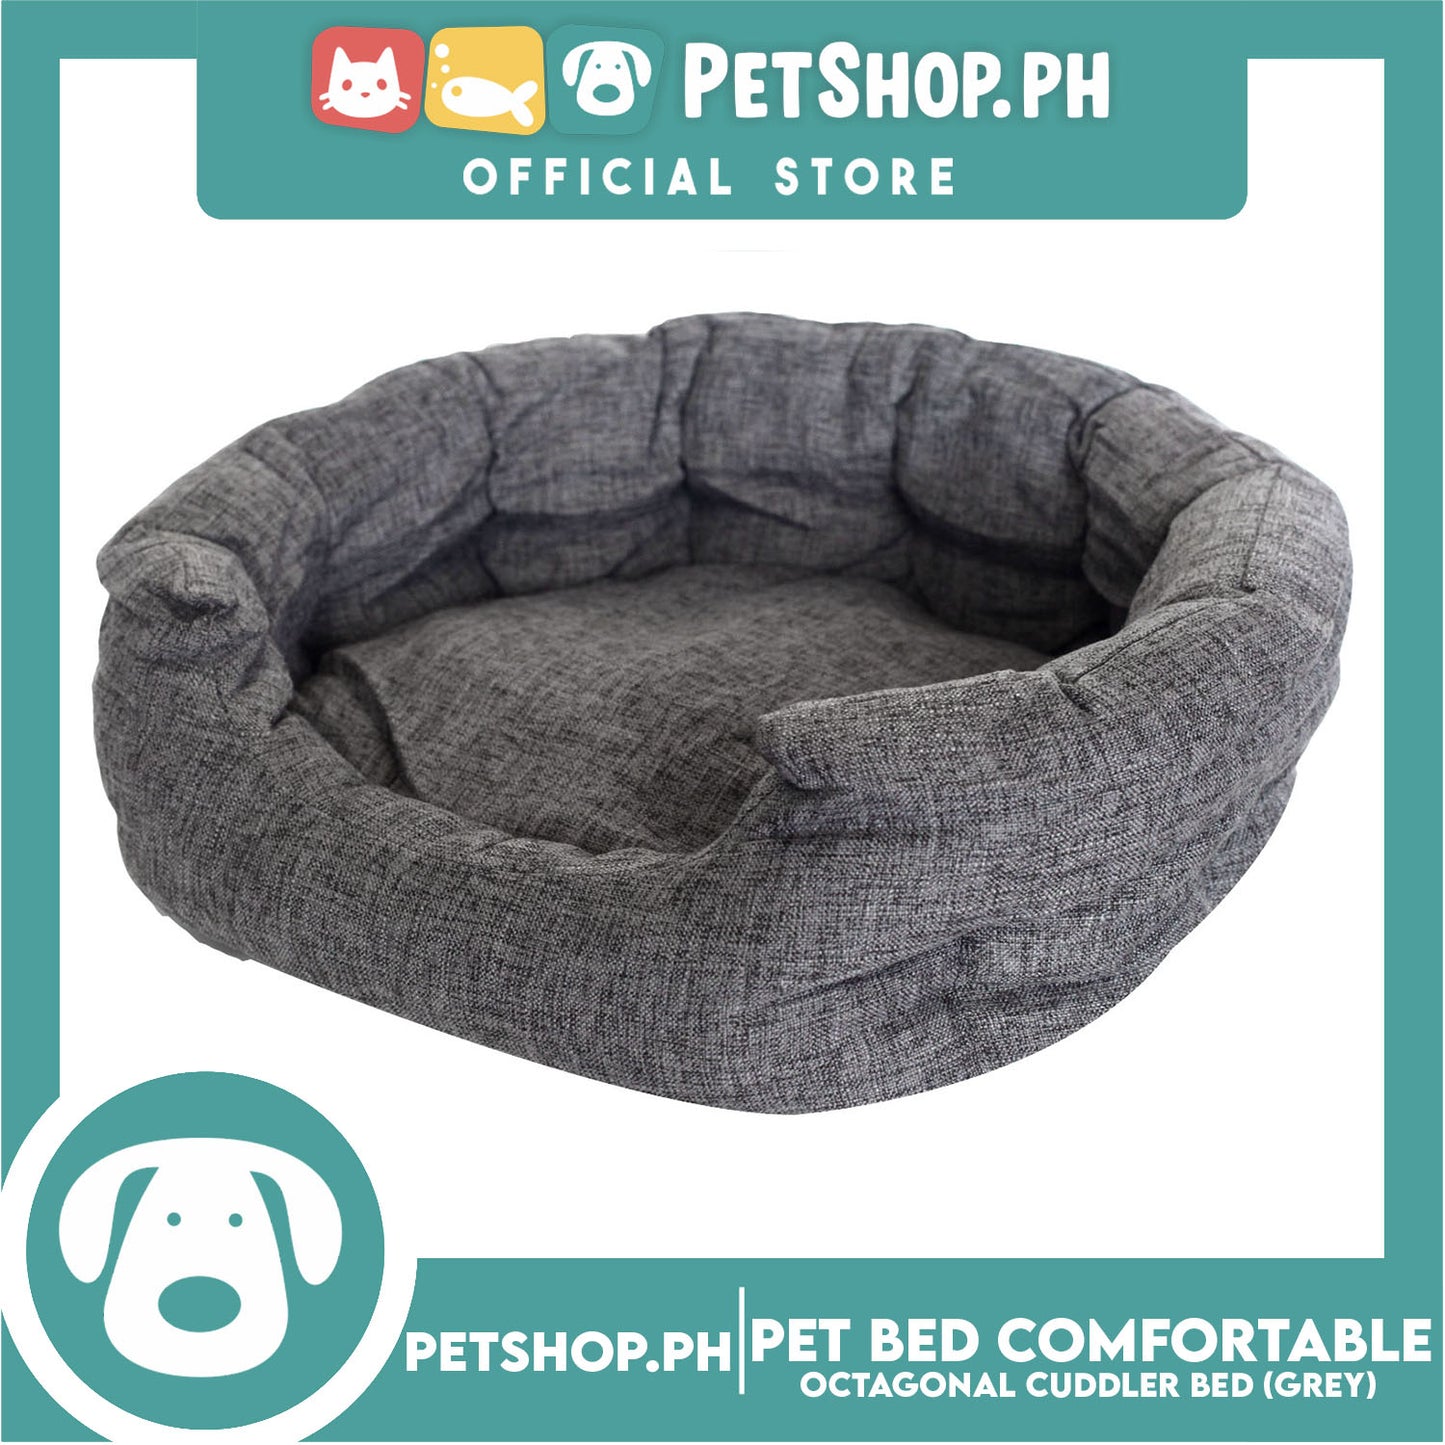 Pet Bed Comfortable Octagonal Cuddler Dog Bed 65x60x18cm Large for Dogs & Cats (Grey)